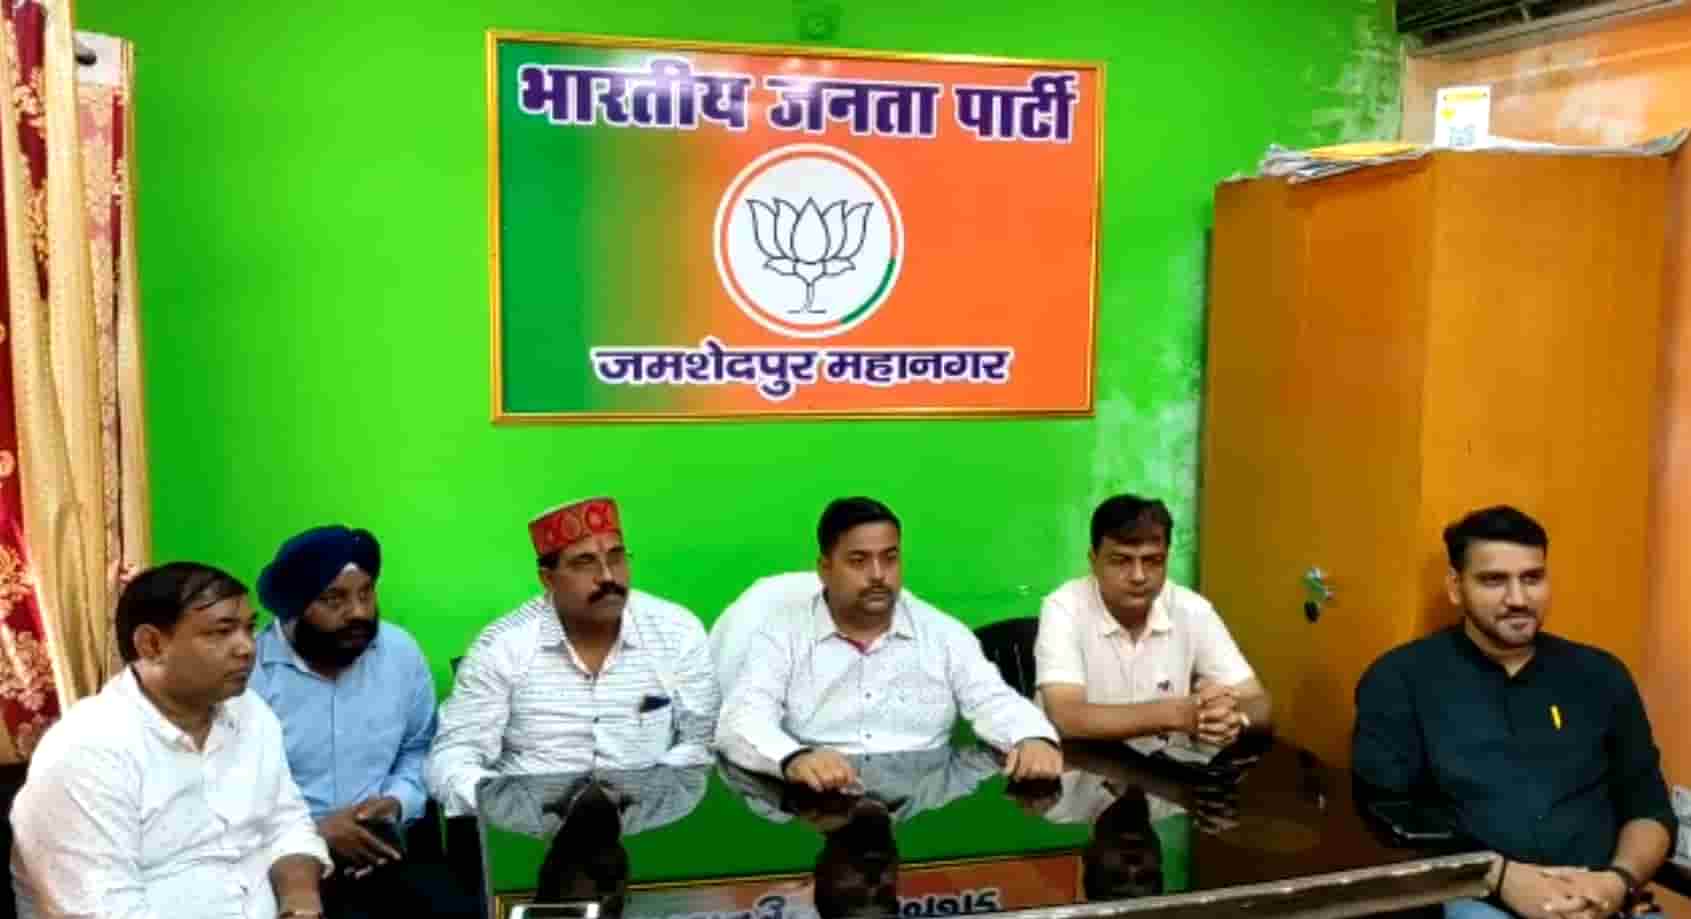 Jamshedpur Mahanagar BJP Jamshedpur Mahanagar BJP Town Post